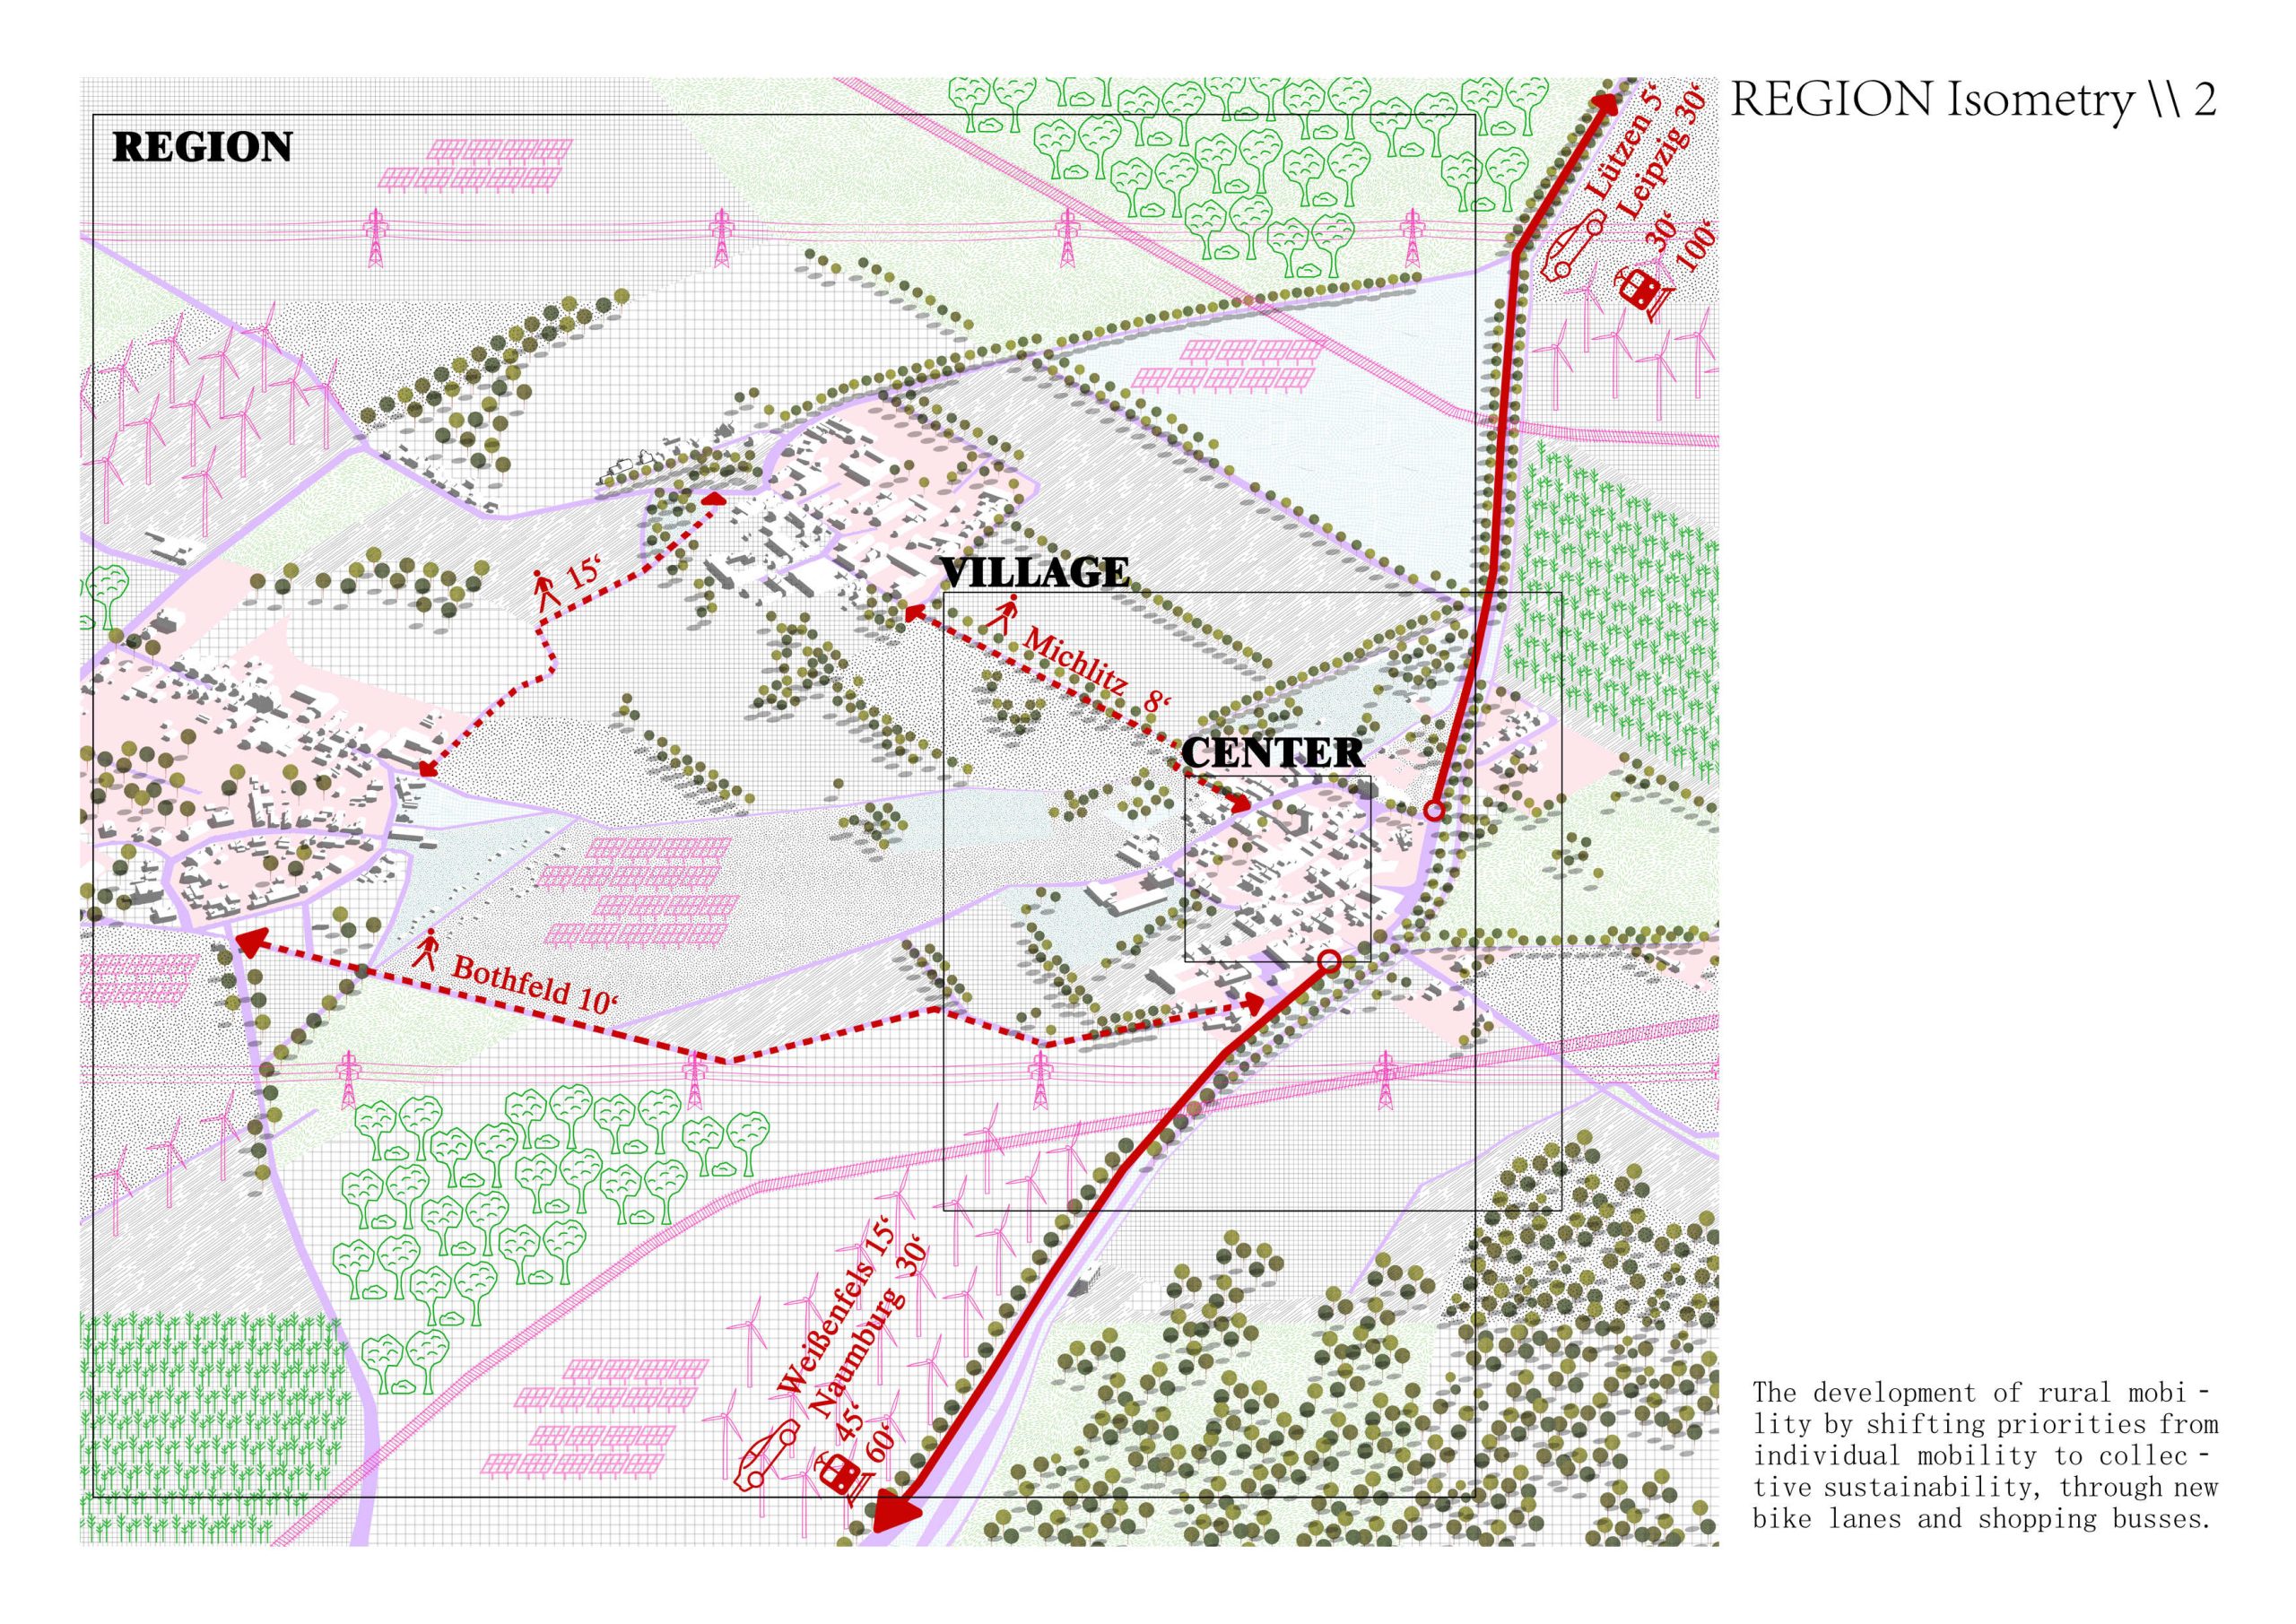  Selected project – Rethinking villages, Reinventing rurbanism  Perspektive